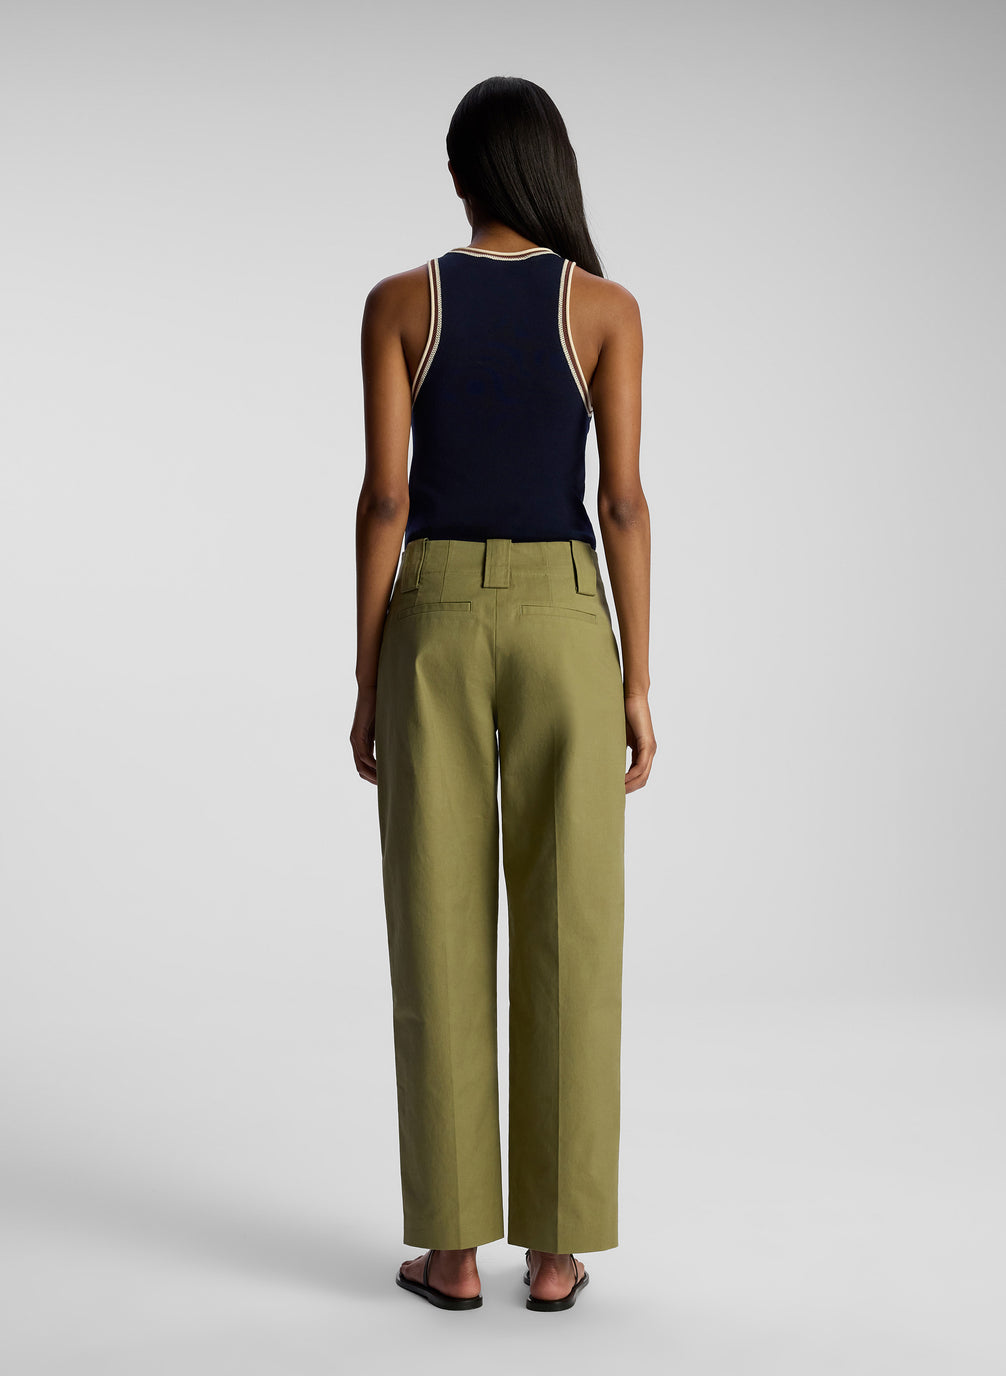 back view of woman wearing navy blue tank top and olive green pants